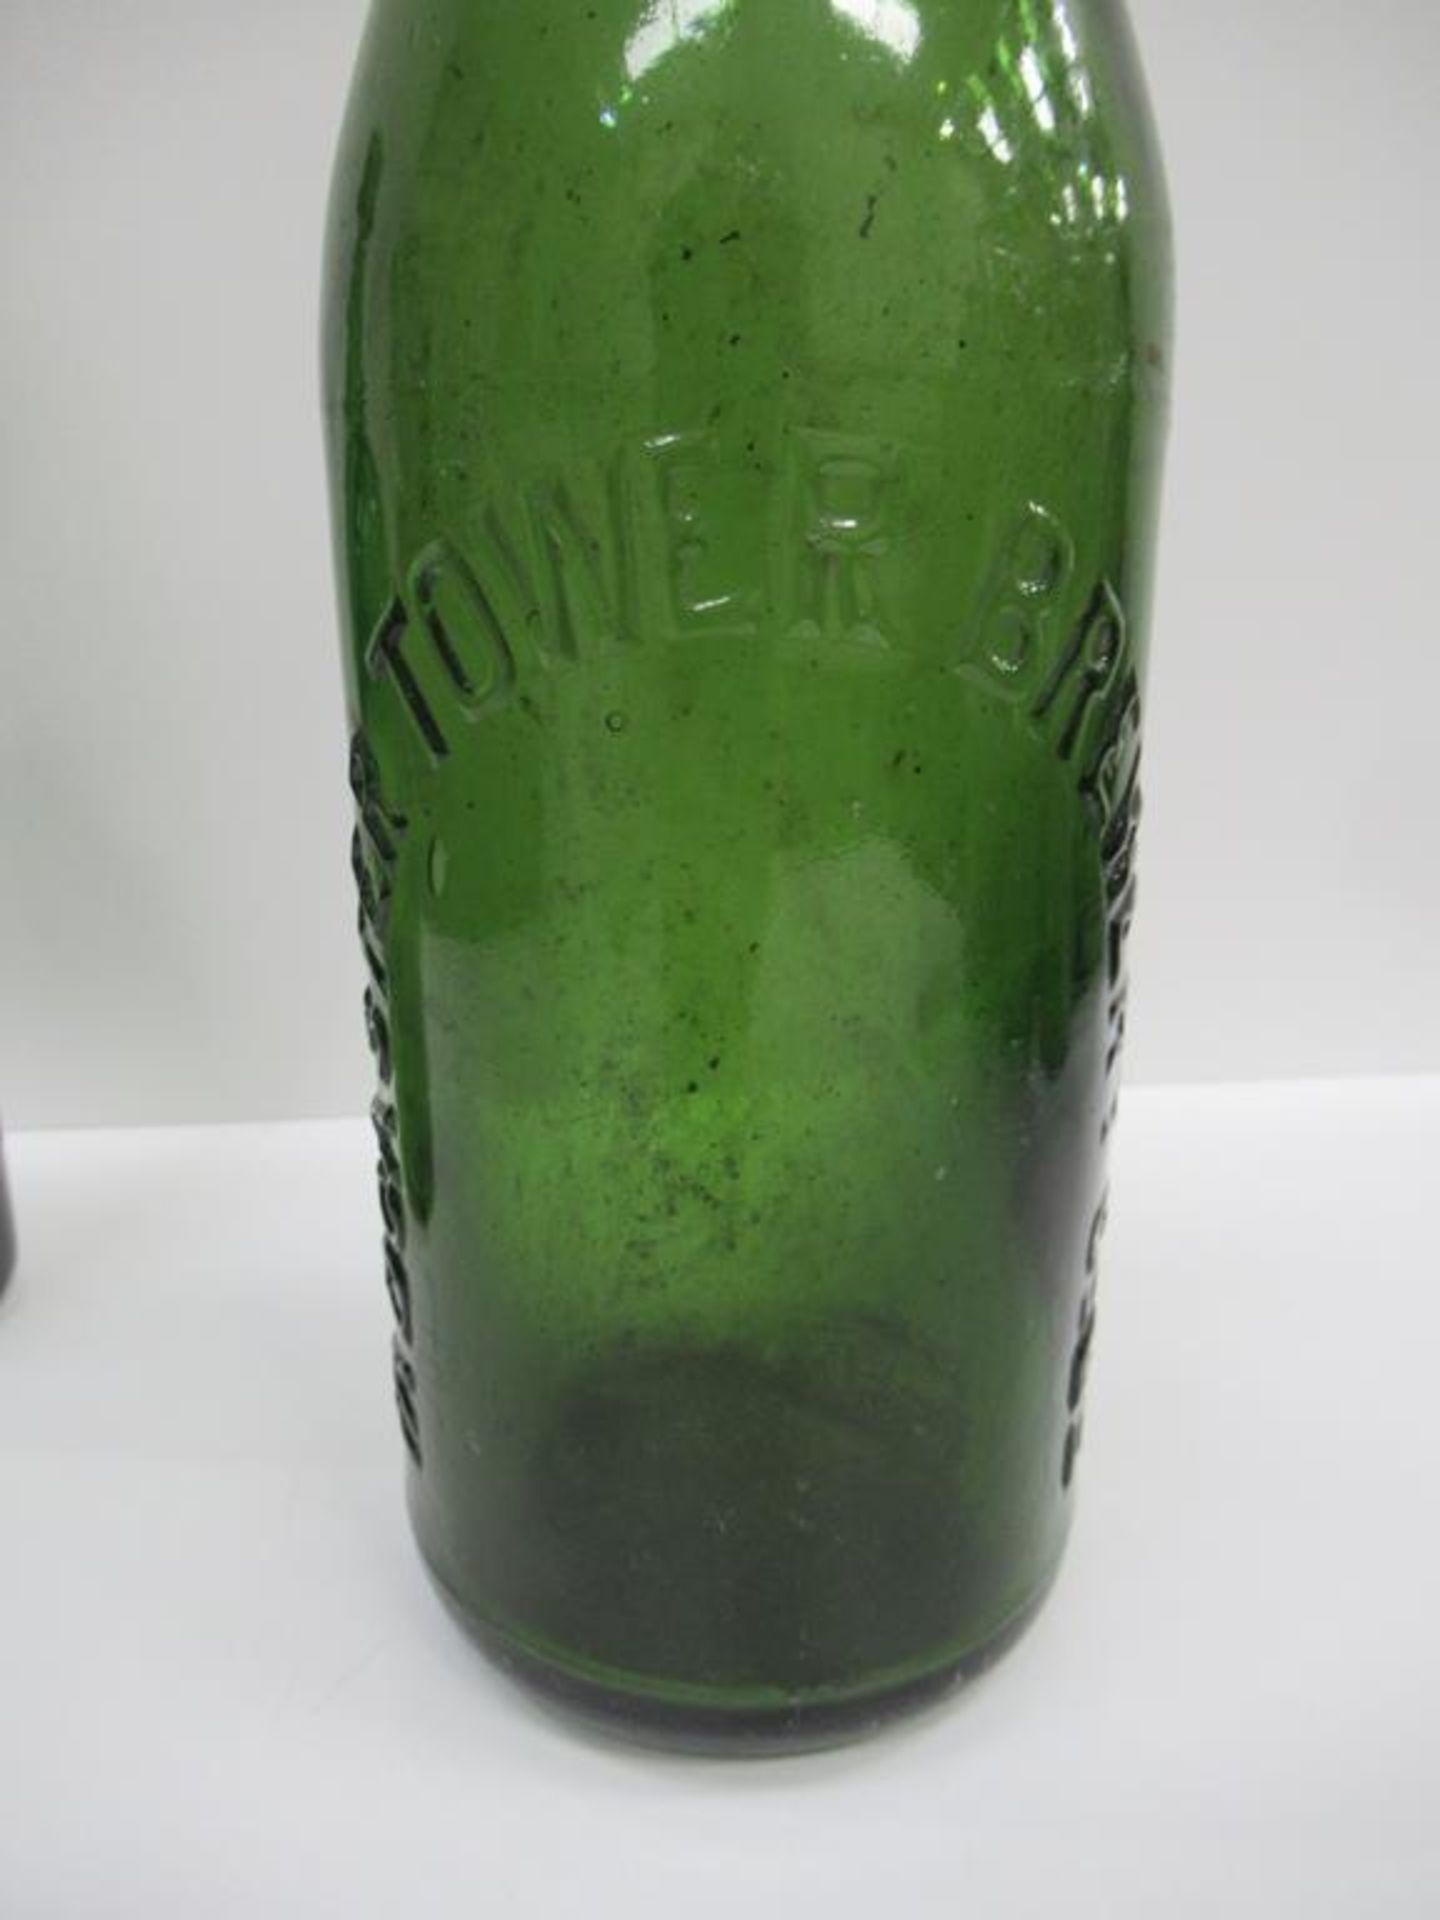 6x Grimsby Tadcaster Tower Brewery Co. Ltd bottles (2x coloured) - Image 8 of 22